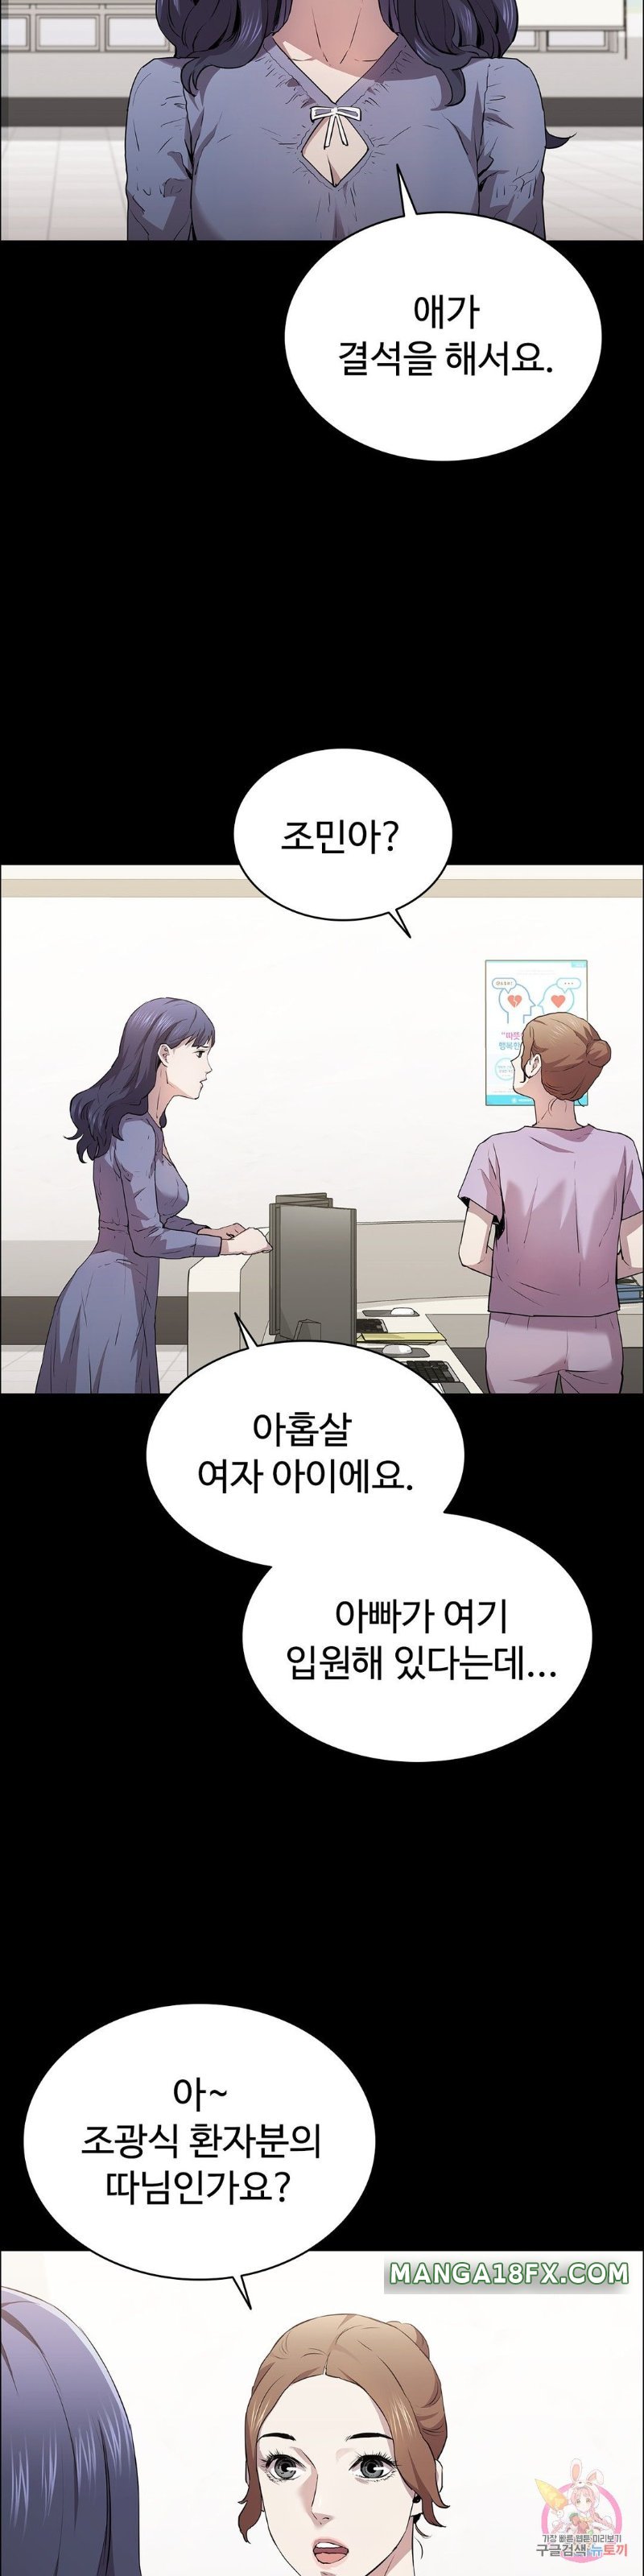 Innocence Beauty Raw - Chapter 13 Page 2